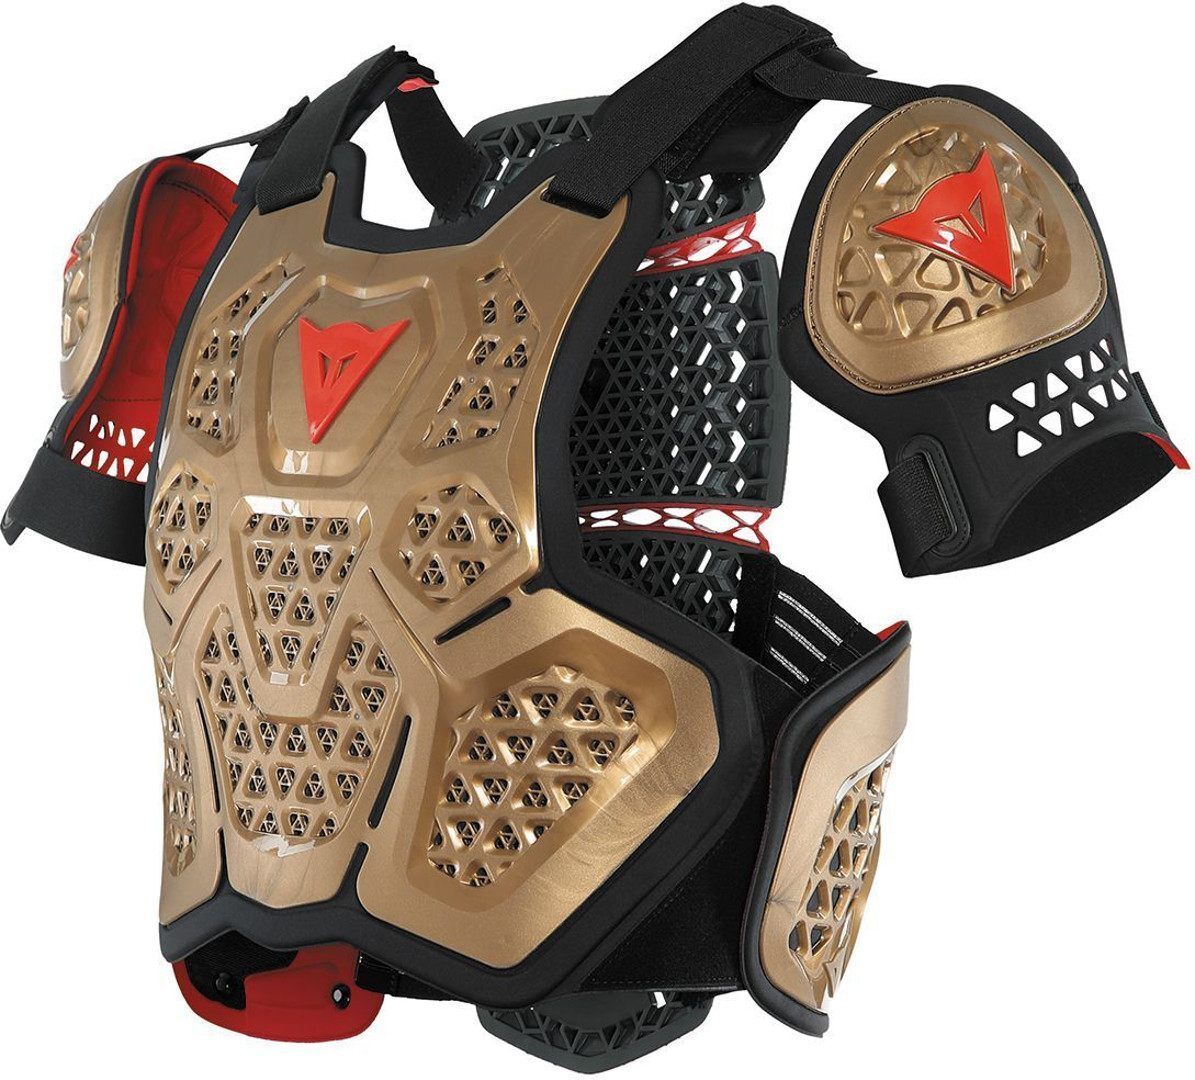 Photos - Motorcycle Body Armour Dainese Mx1 Roost Guard Protector Vest Unisex Brown Size: 2xs Xs S M 44100 